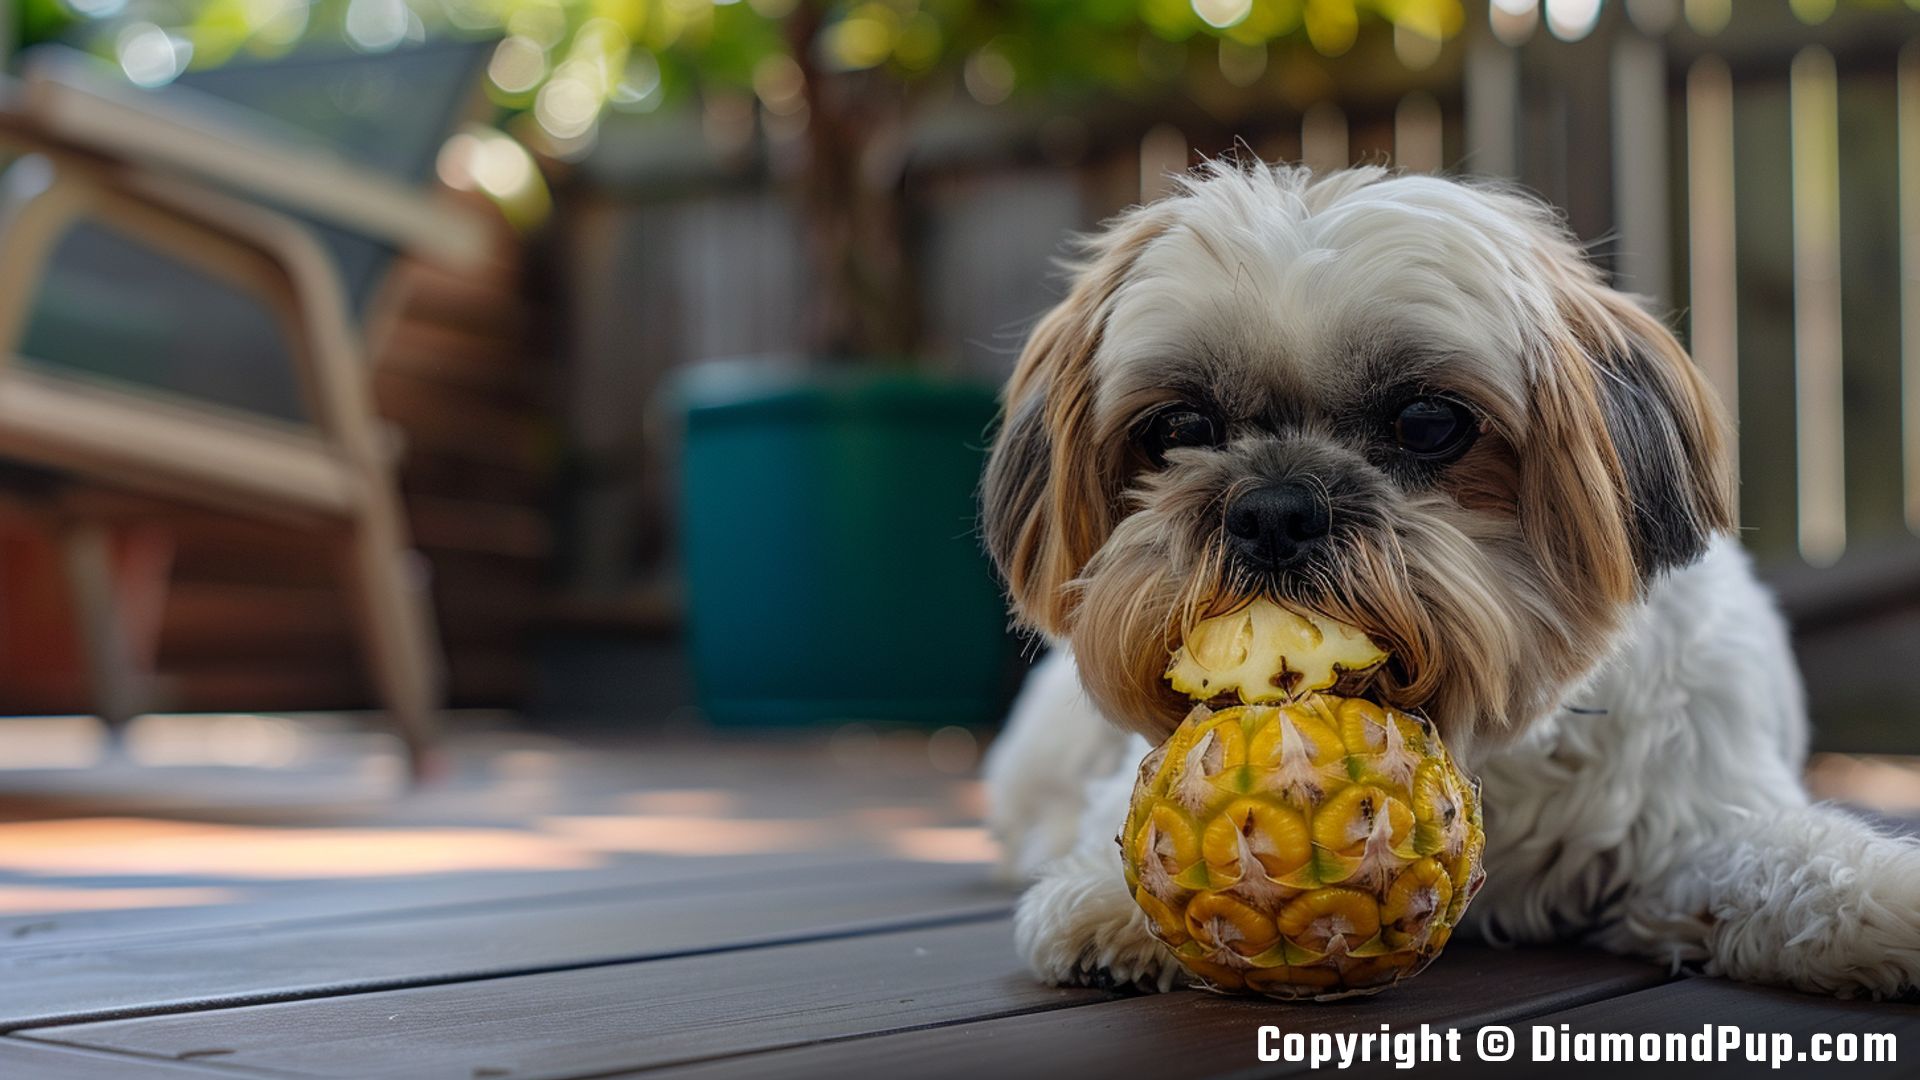 Photo of a Playful Shih Tzu Snacking on Pineapple